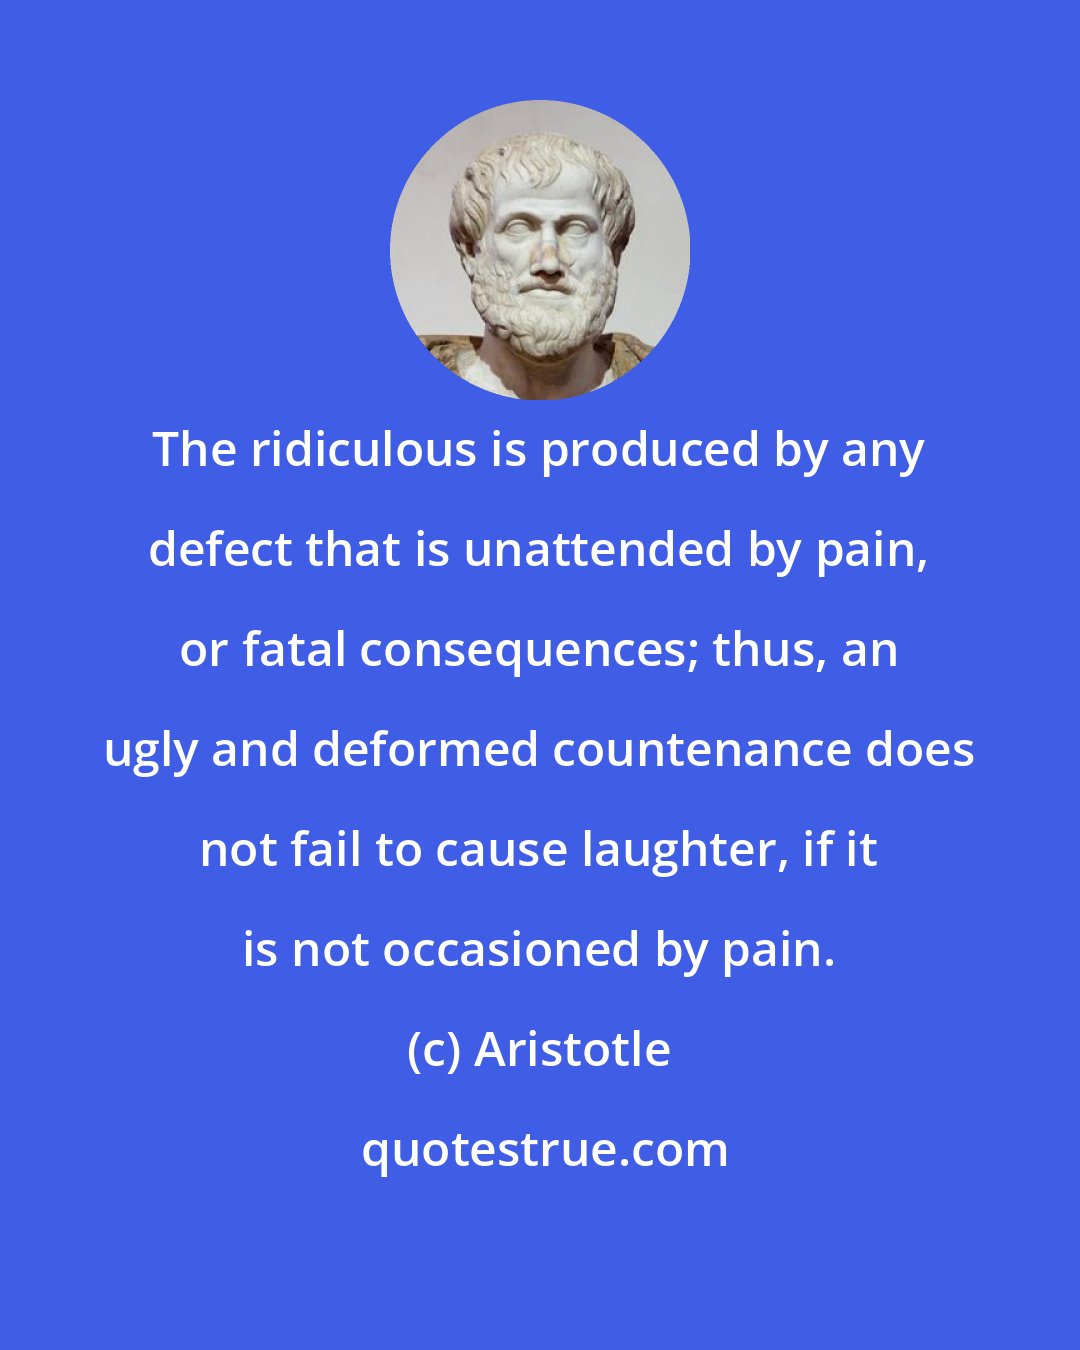 Aristotle: The ridiculous is produced by any defect that is unattended by pain, or fatal consequences; thus, an ugly and deformed countenance does not fail to cause laughter, if it is not occasioned by pain.